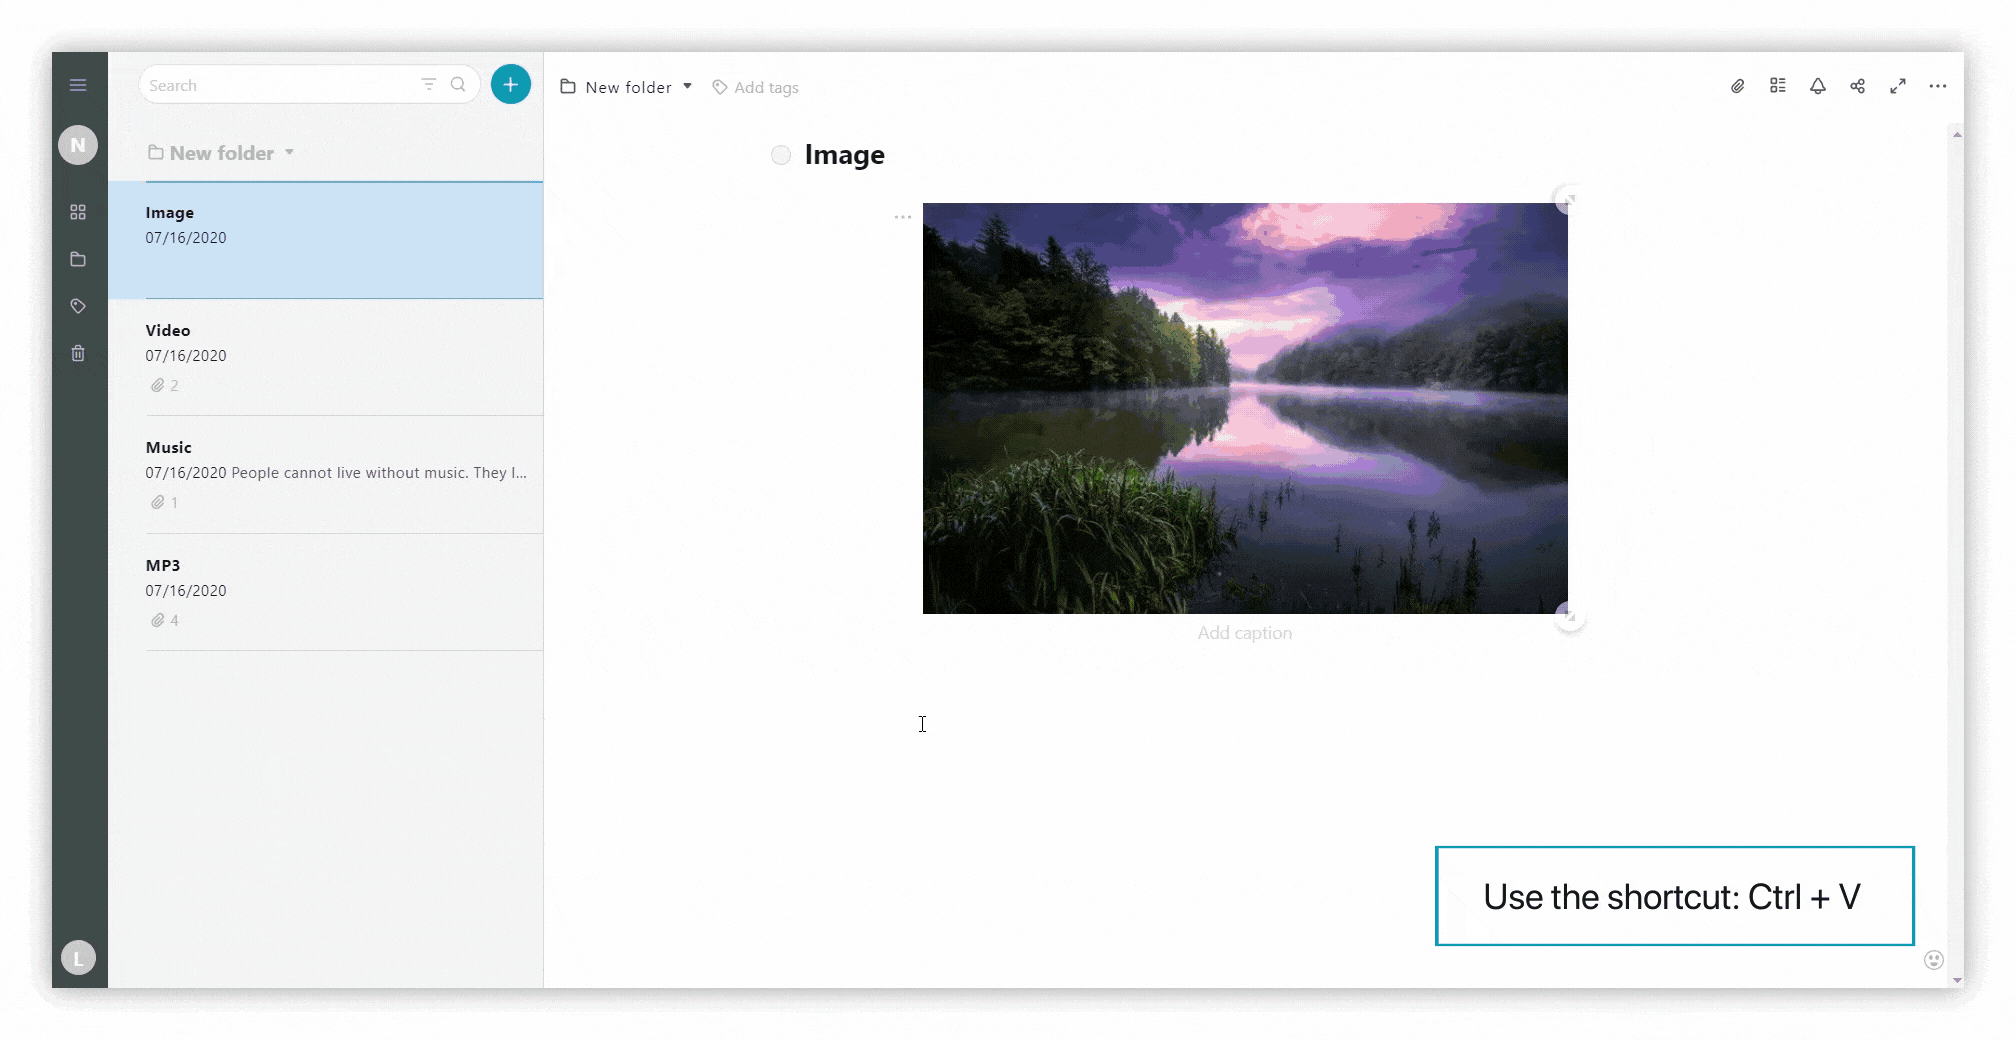 Add image and drop / resize / move it